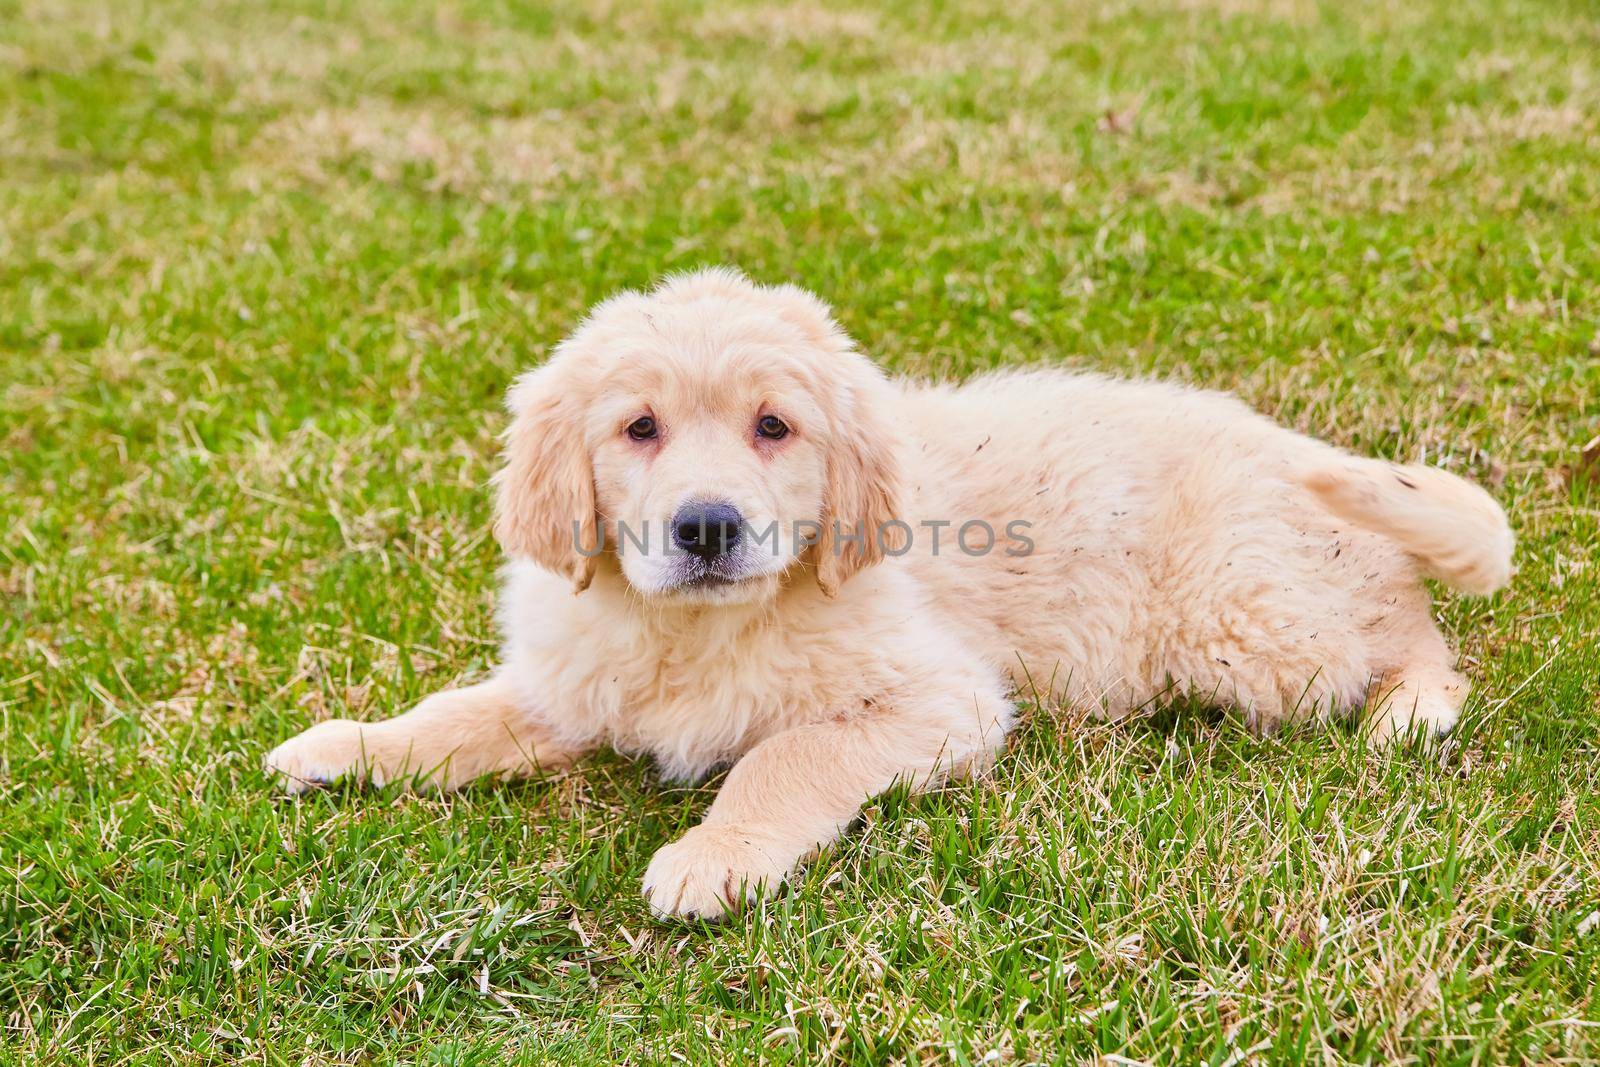 Image of Older goldendoodle puppy resting in grass